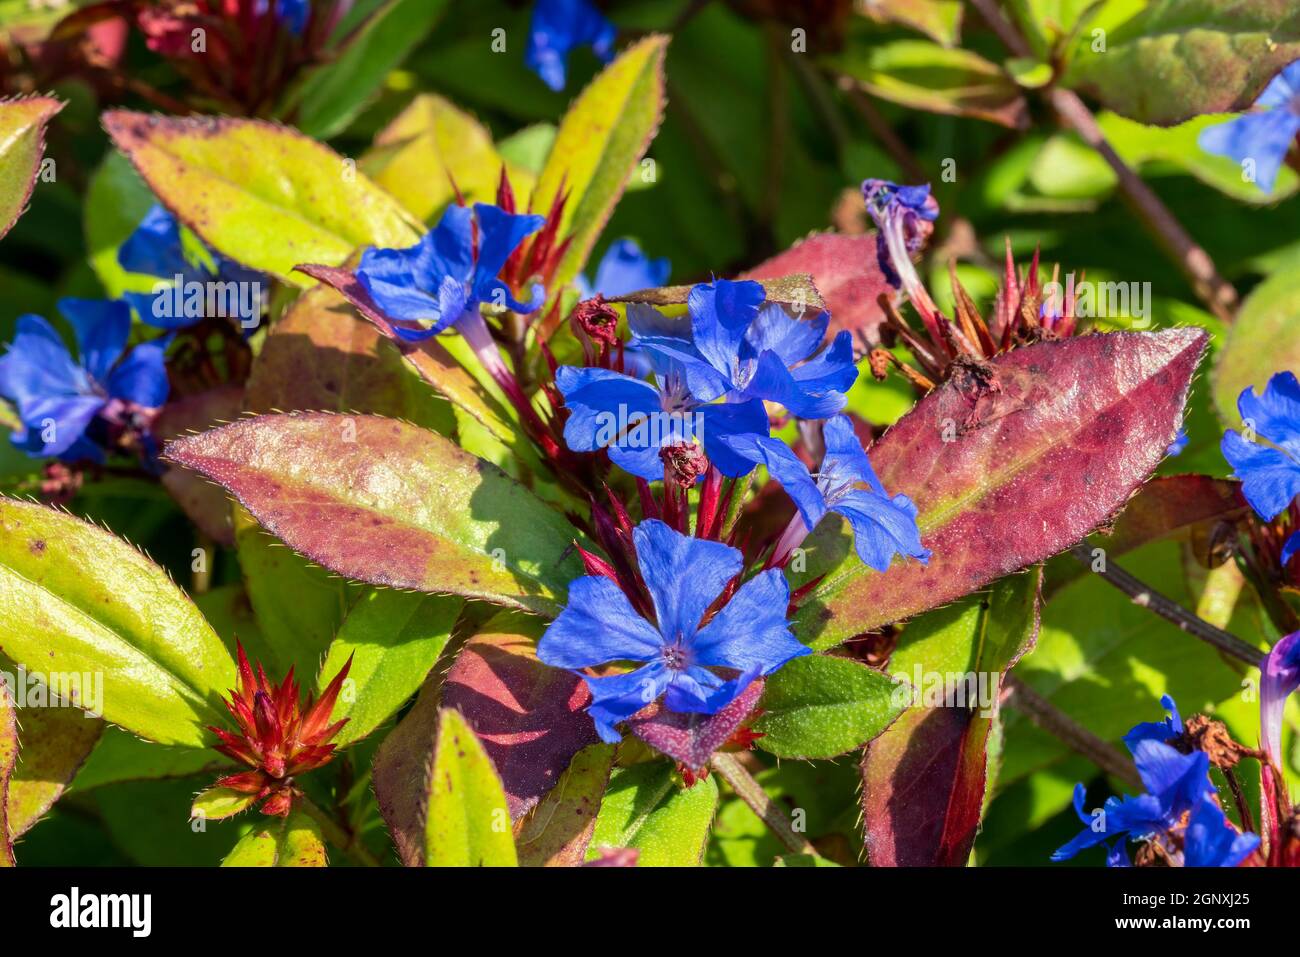 Ceratostigma plumbaginoides a summer autumn flower plant commonly known as blue flowered leadwort, stock photo image Stock Photo